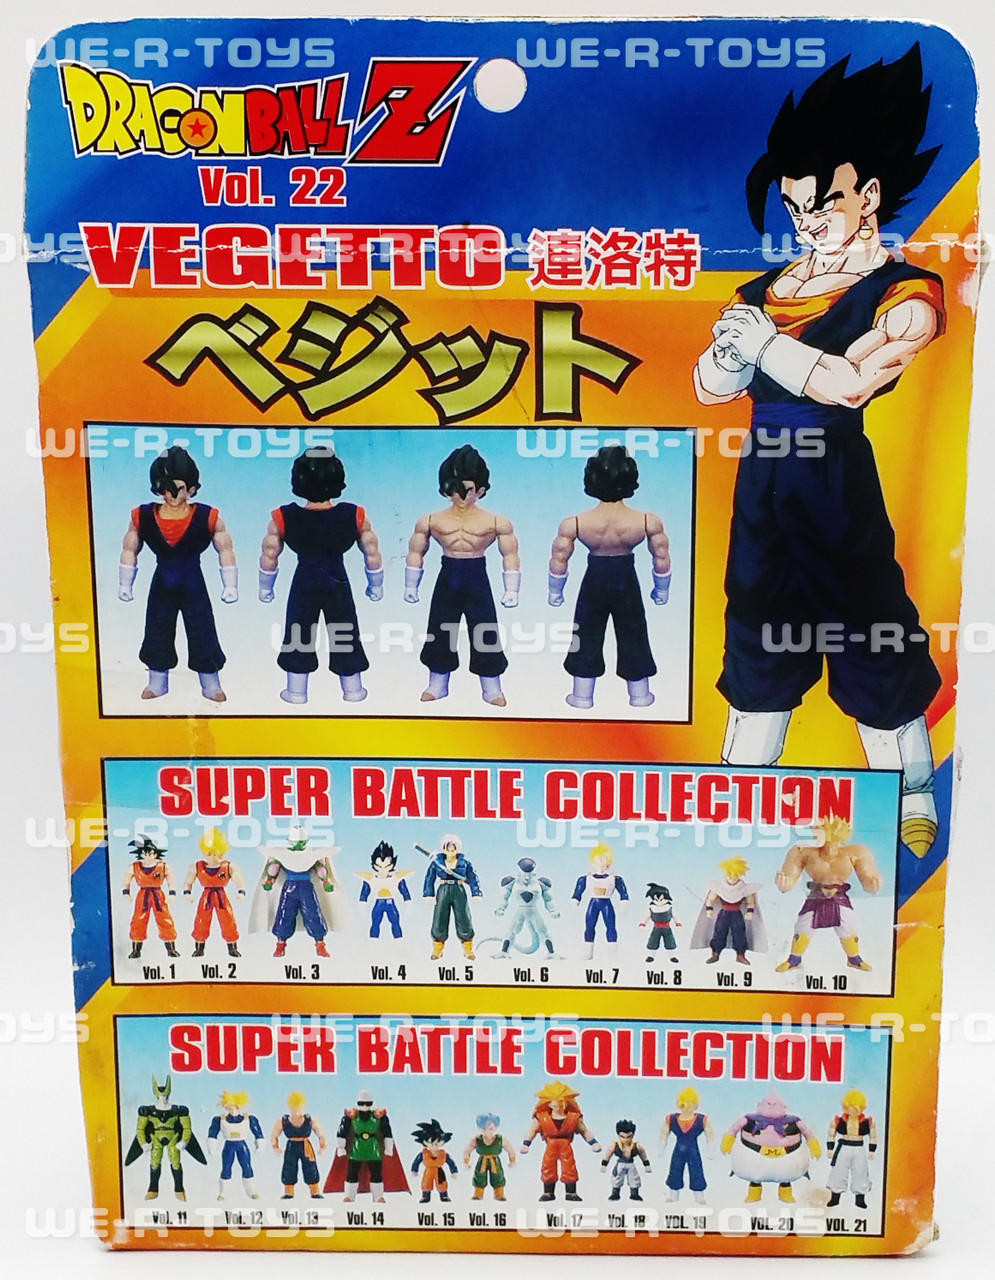 Dragon Ball Z Vol. 22 Vegetto Action Figure Bandai 1997 NEW - We-R-Toys